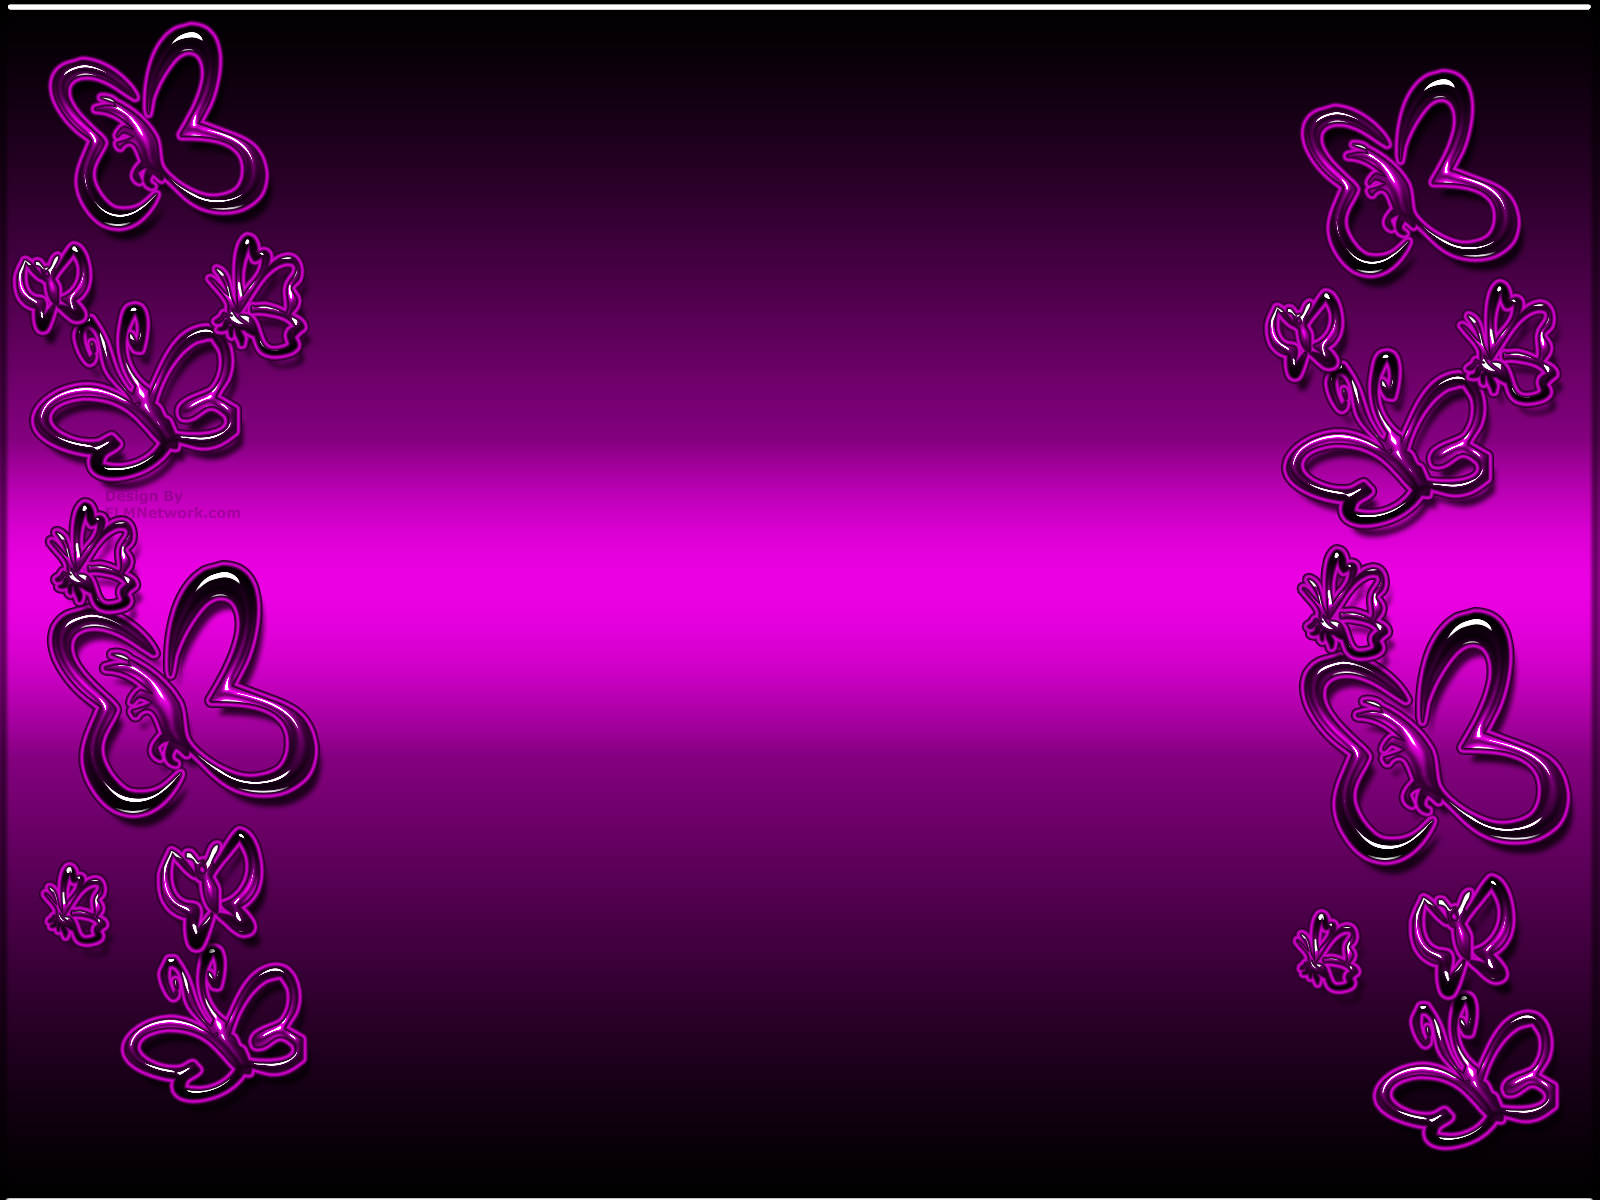 Gallery For Gt Cute Purple Butterfly Background